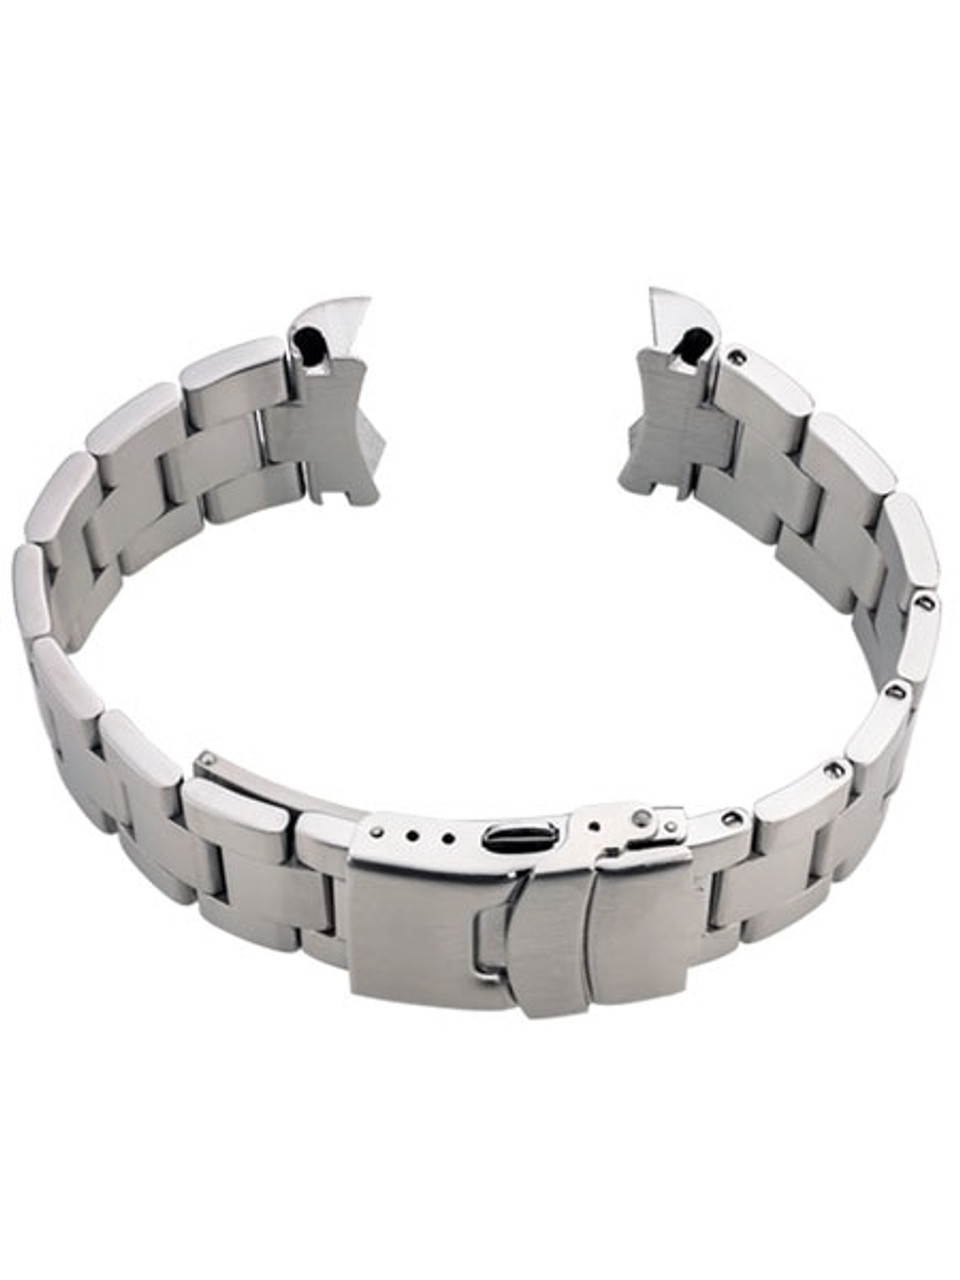 Islander Brushed Stainless Steel Bracelet for Seiko 5 watches SRPE51,53,  55, 57, 61, 63, 67 watches #BRAC-09 (20mm)